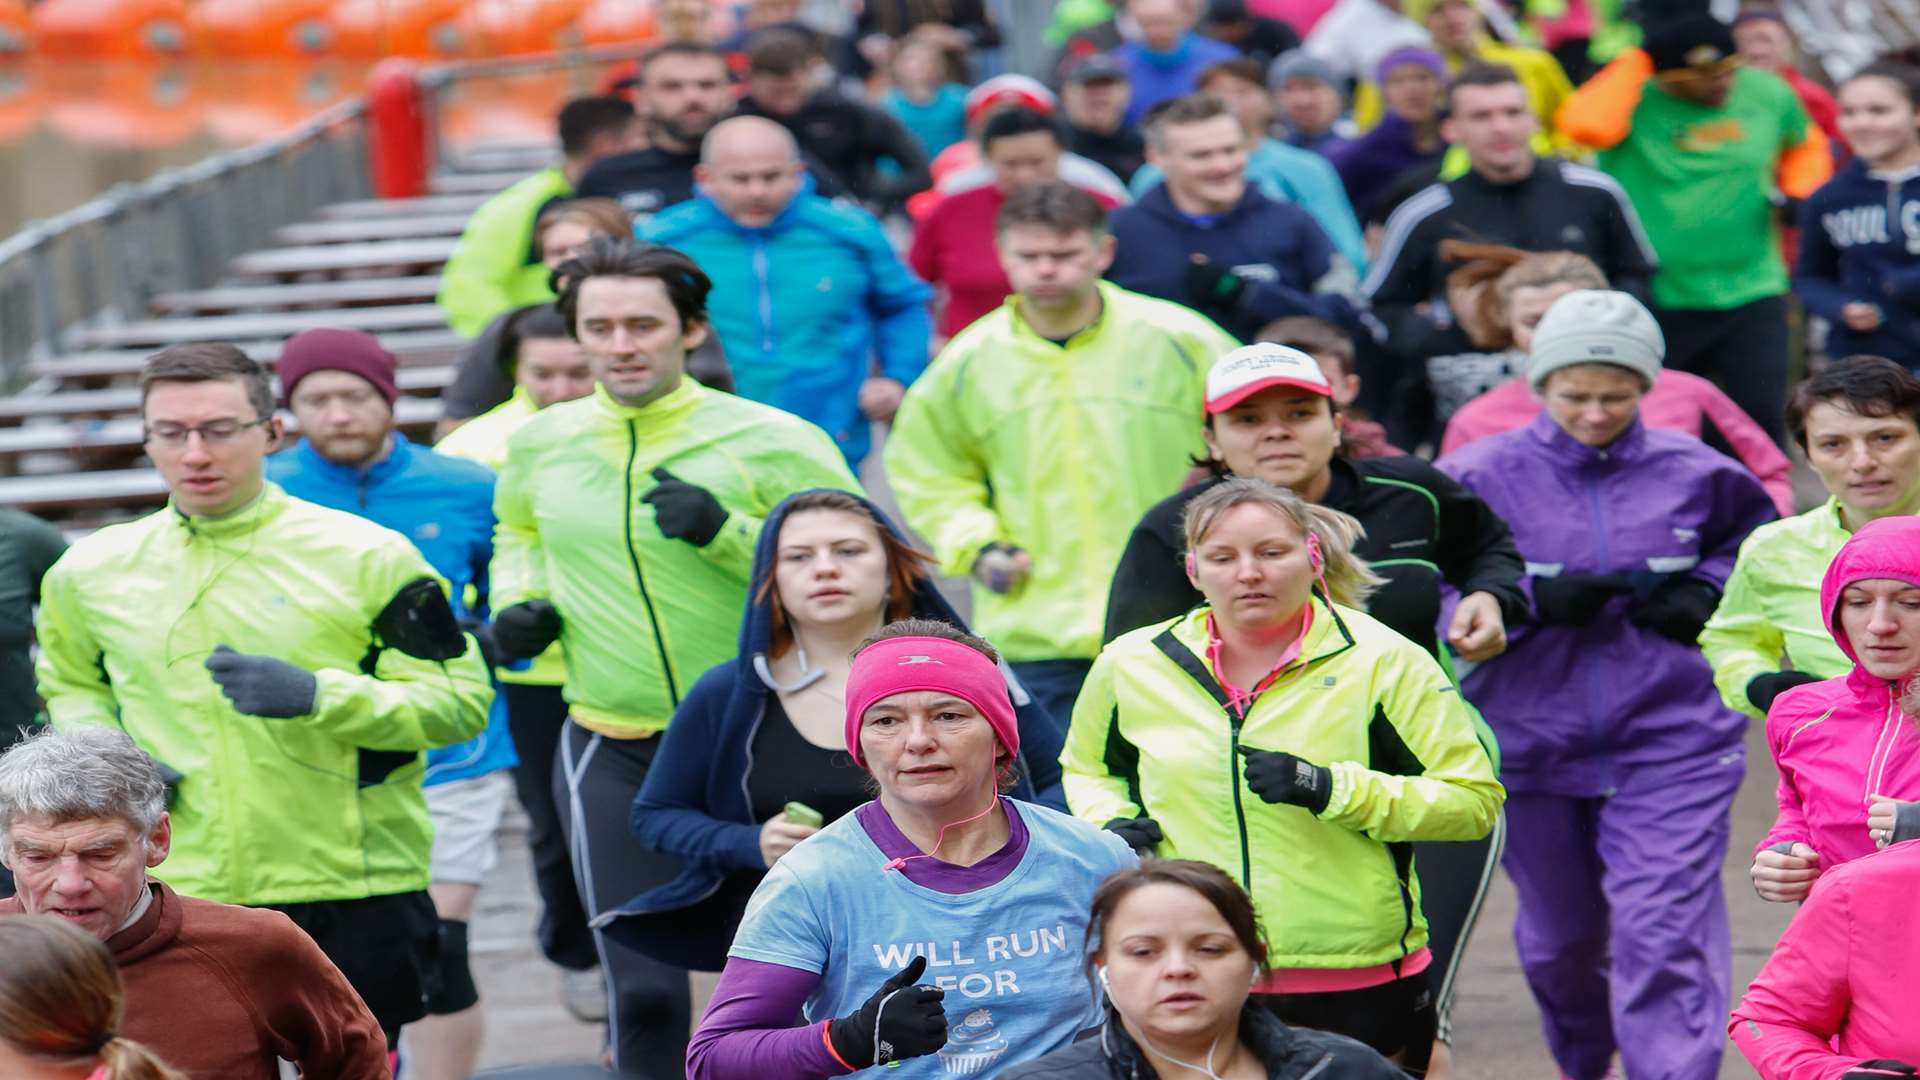 Hundreds of runners take part every weekend